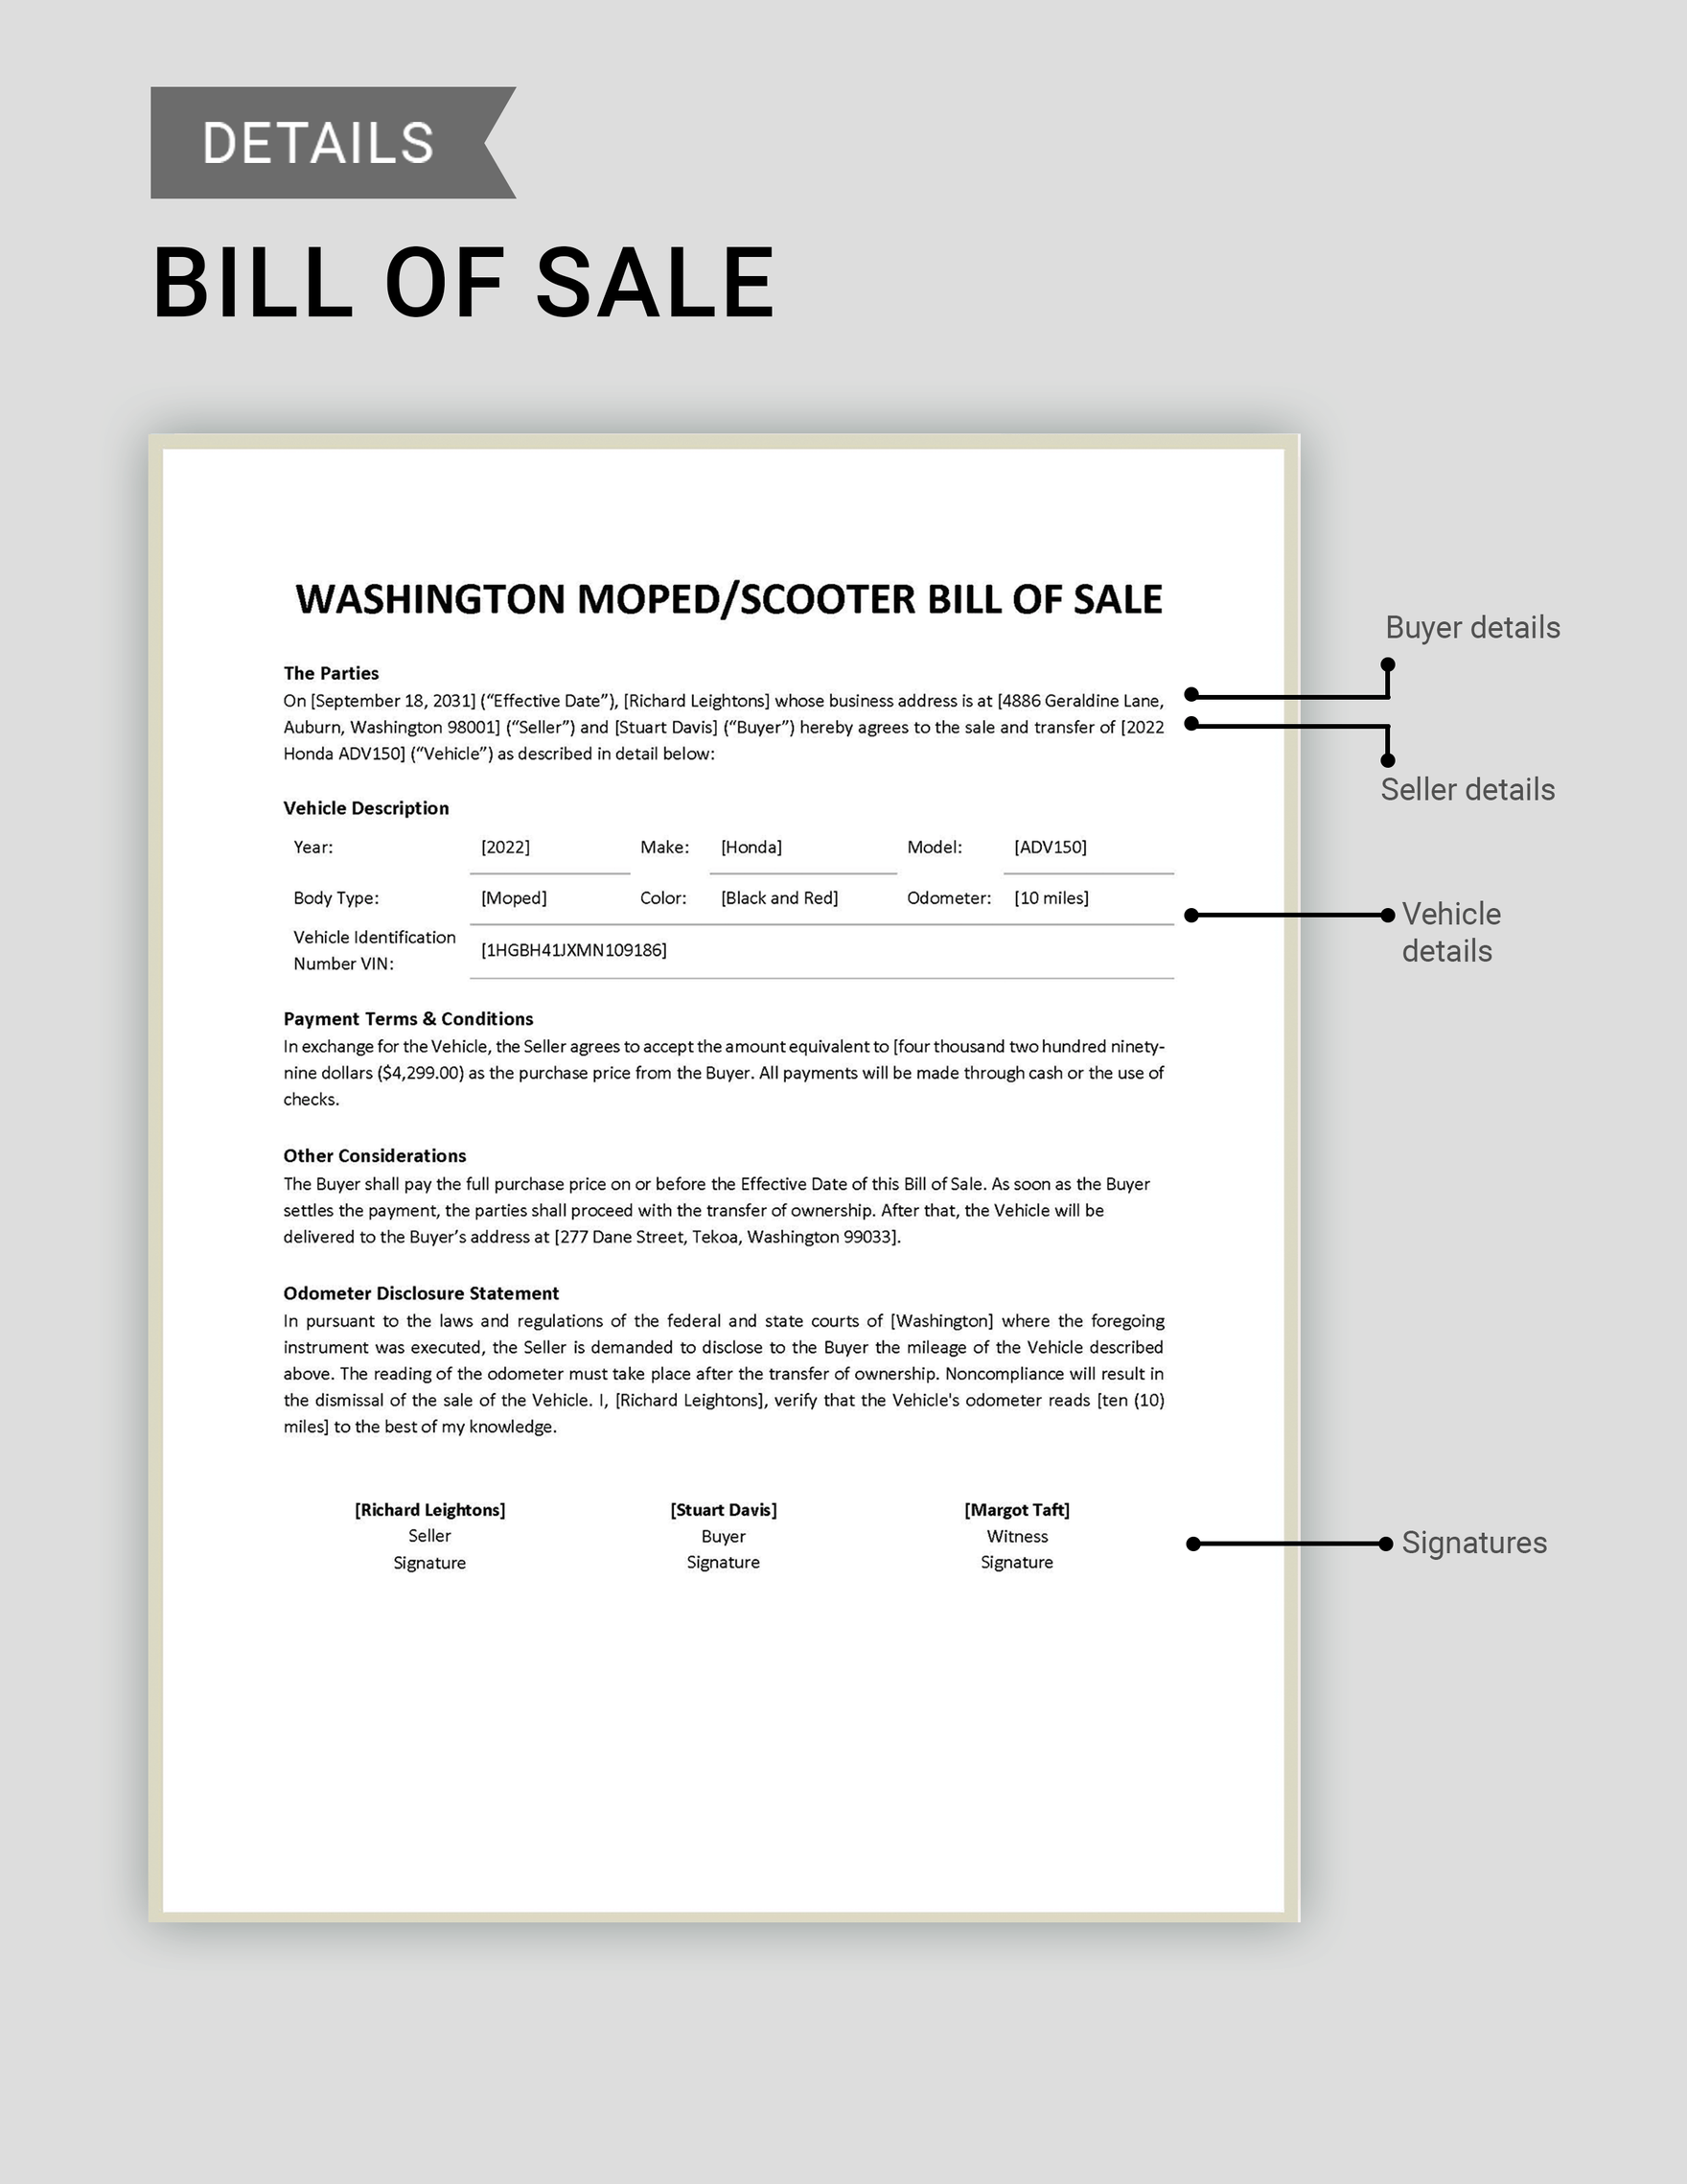 Washington Moped / Scooter Bill of Sale Form Template